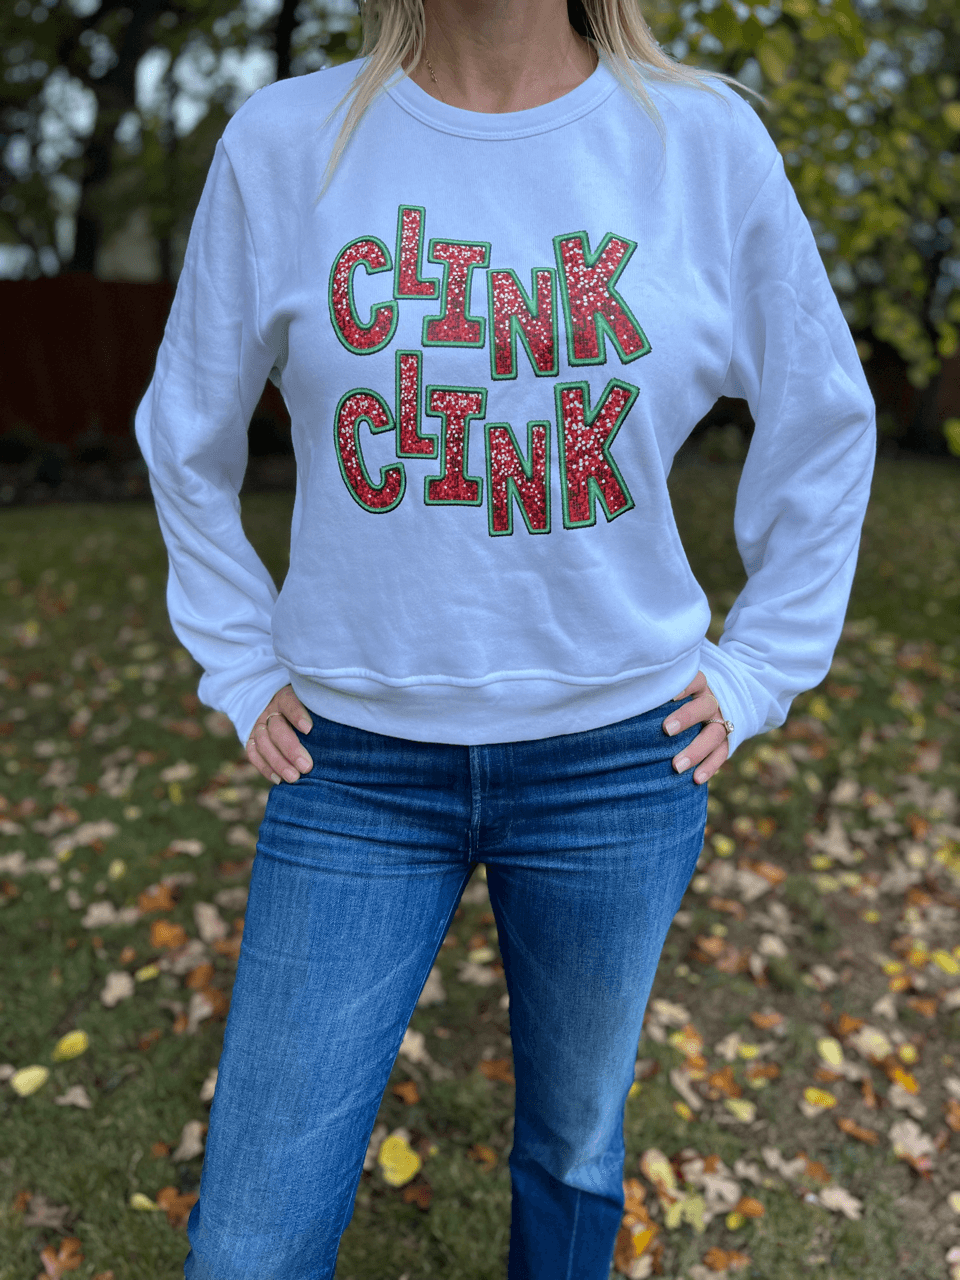 Housewives of True Crime Clink Clink Holiday Crew Neck Sweatshirt in red and green glitter